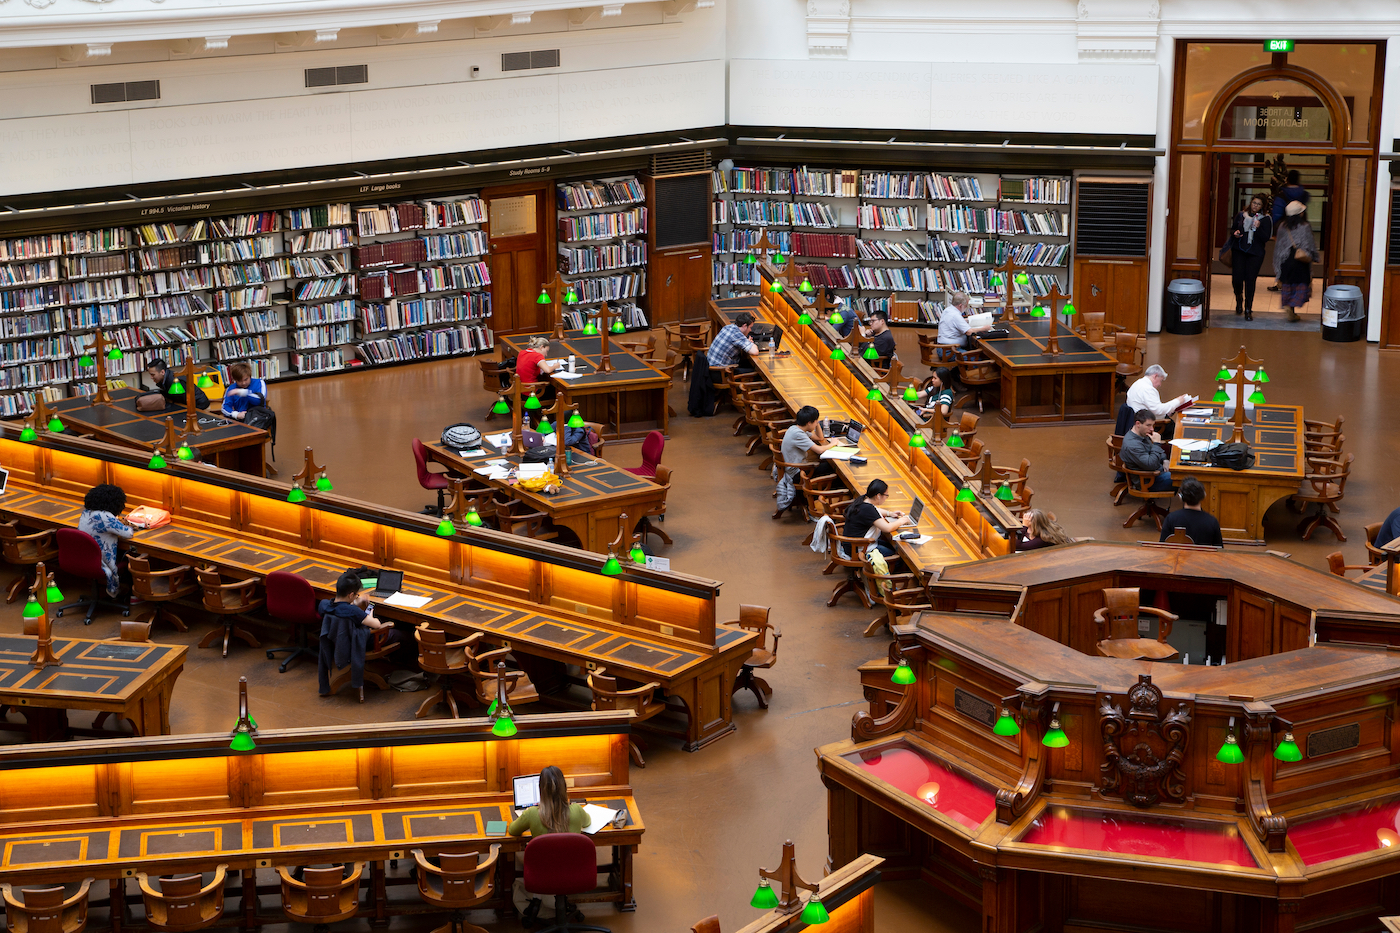 a bird's eye view of a bustling, large public college library.